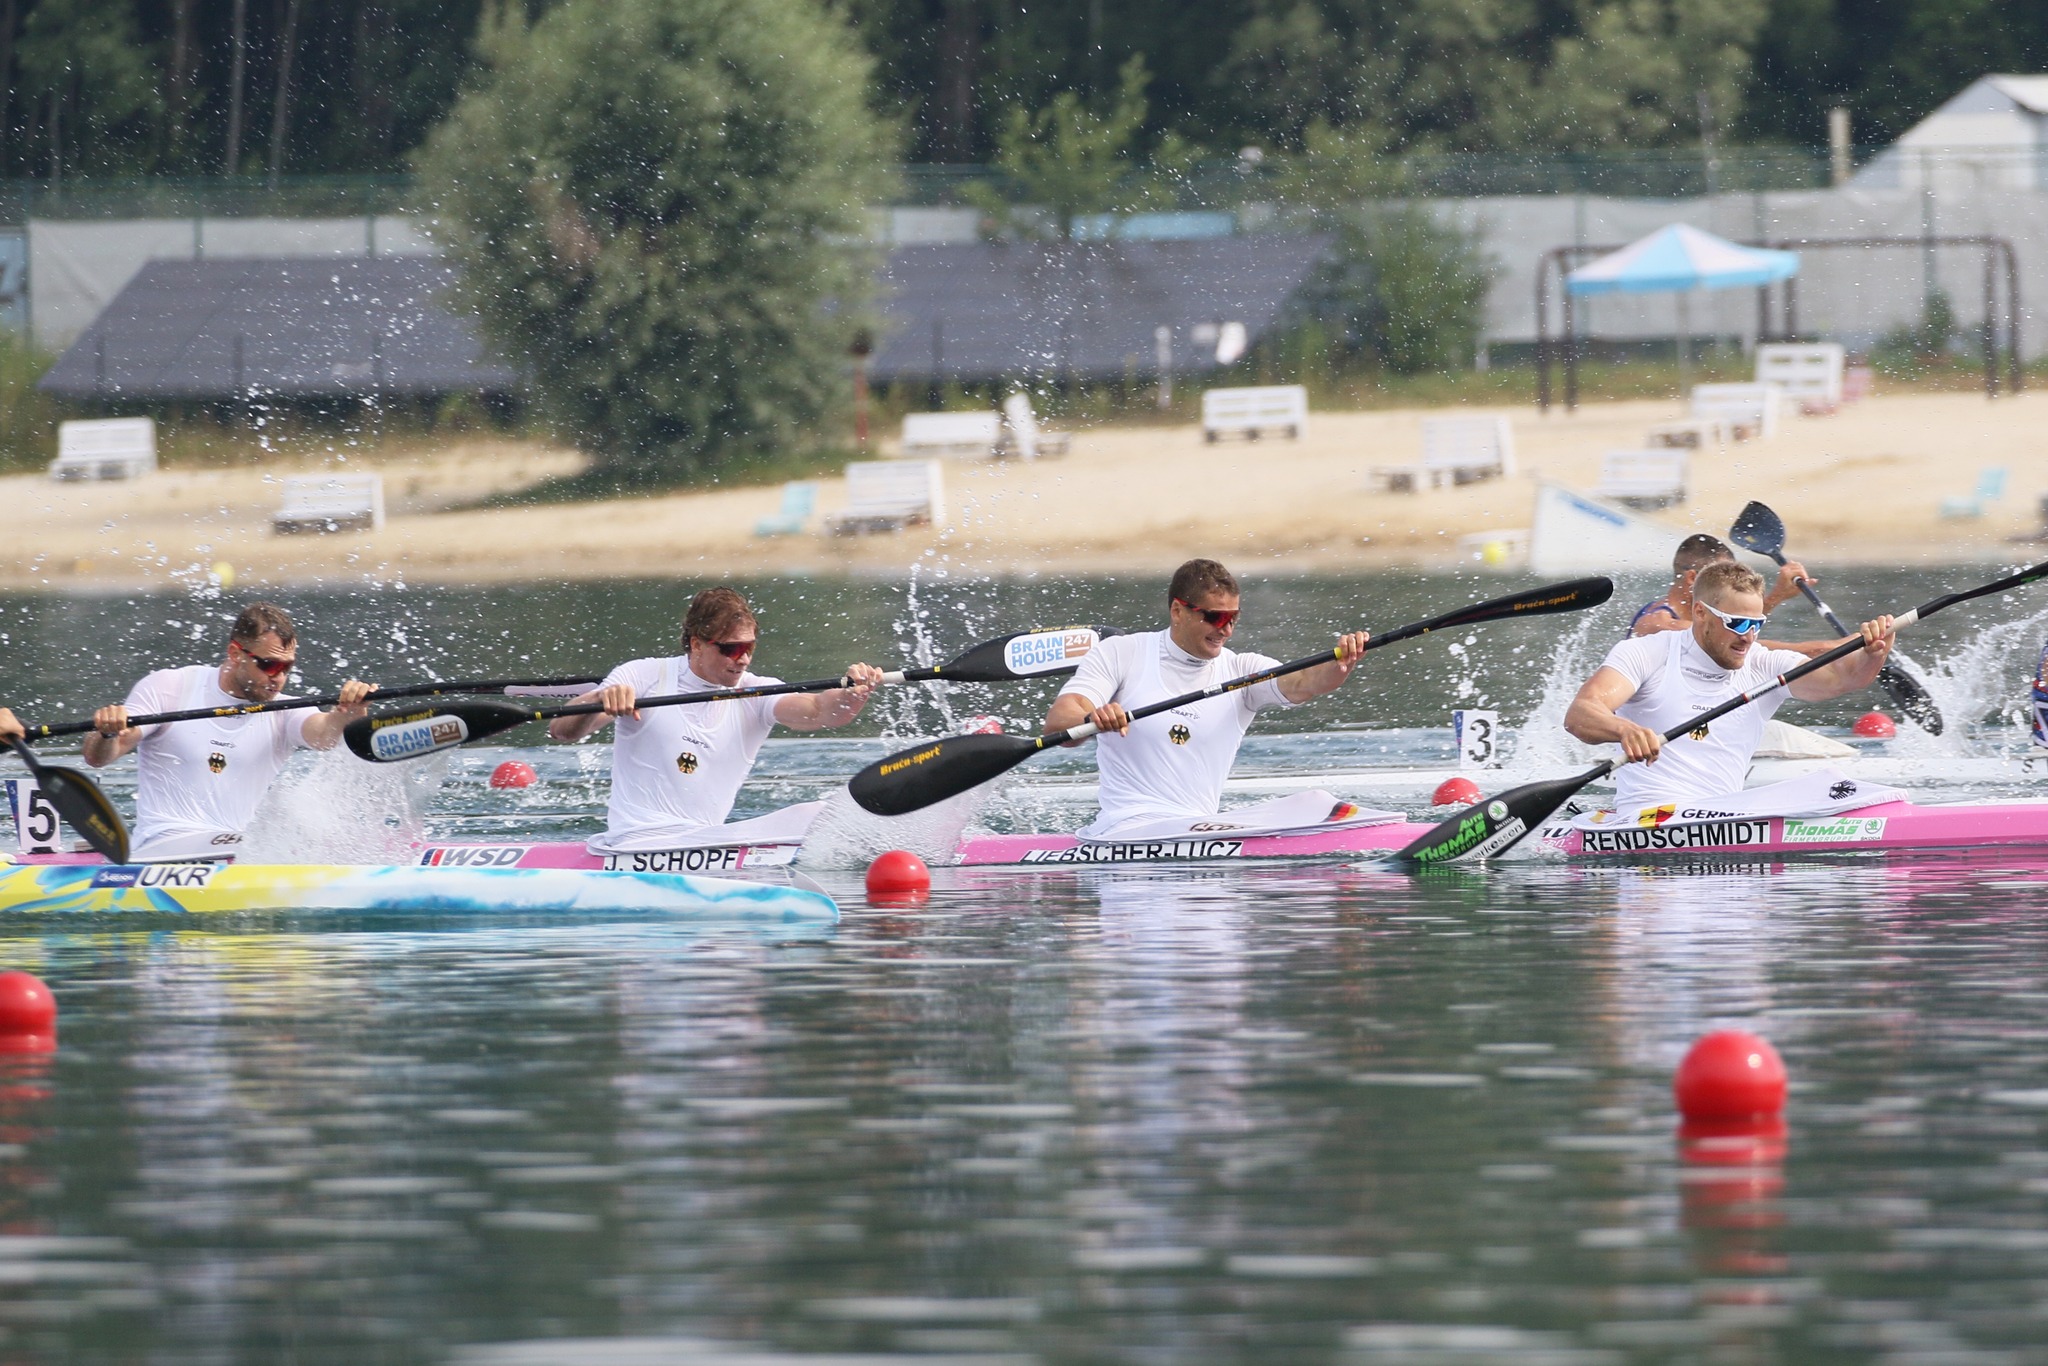 The afternoon session of Canoe Sprint brought the same amount of excitement as the morning session